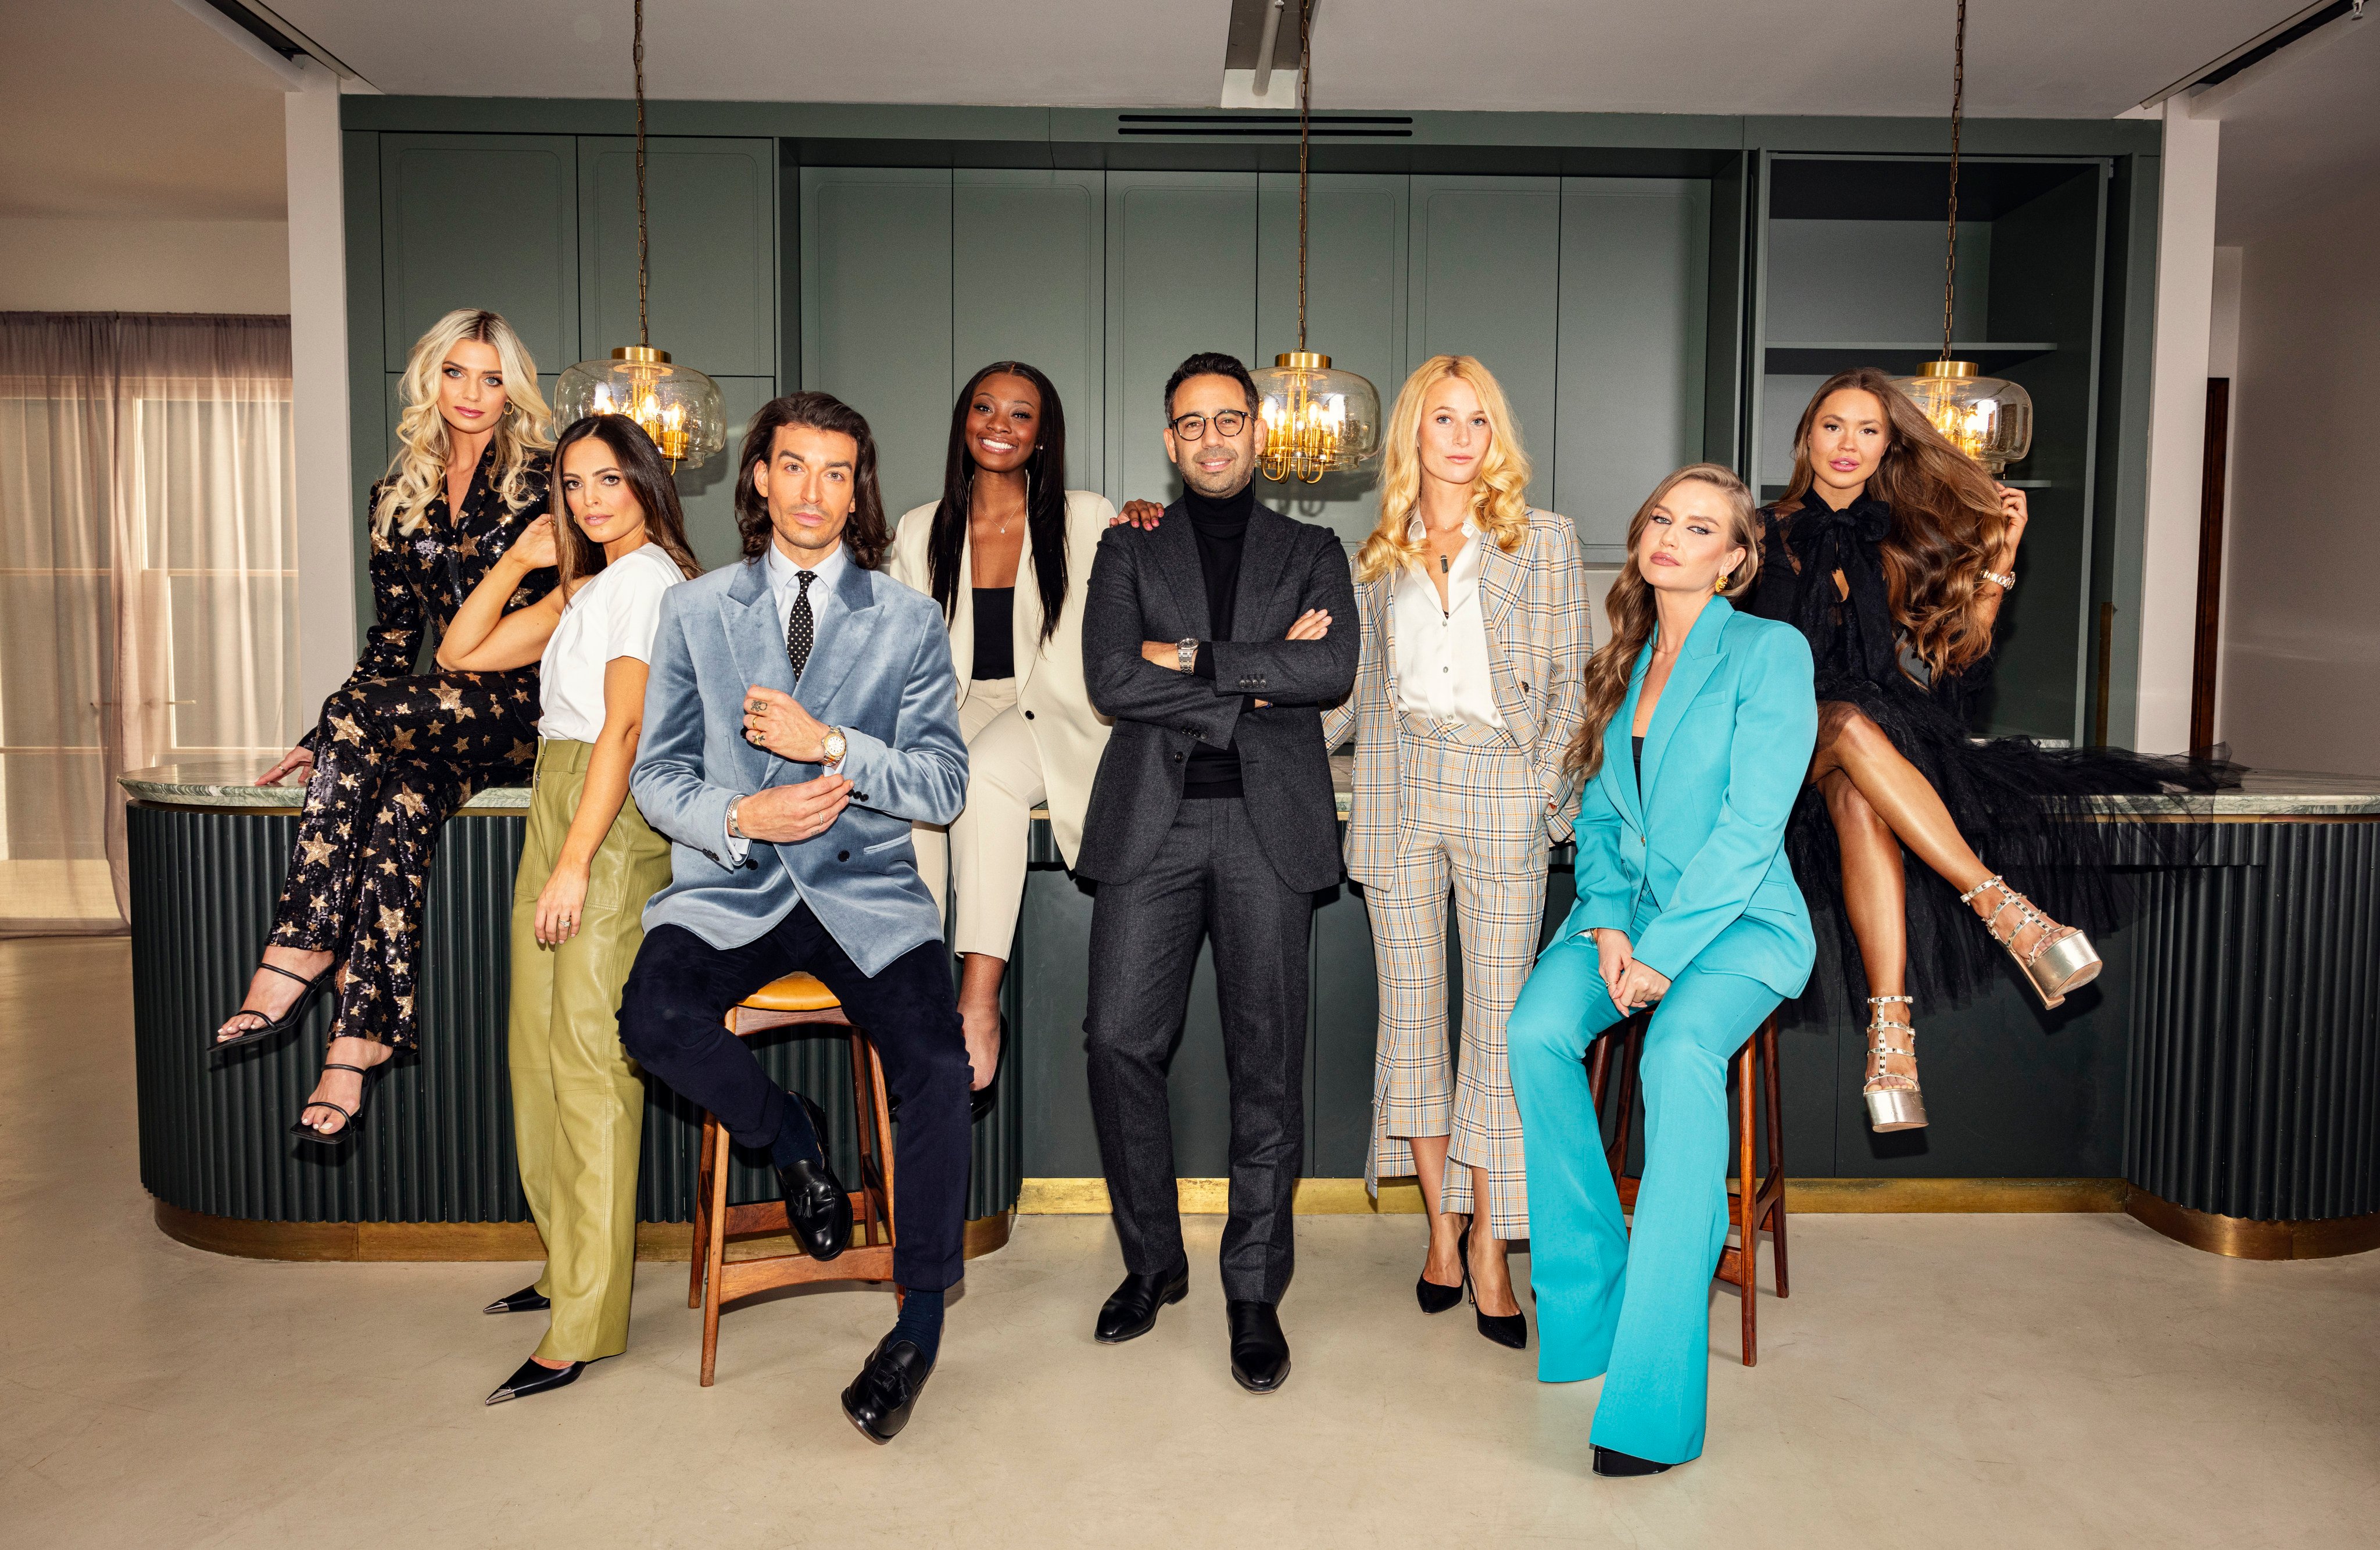 Buying London is a reality show that sees a real estate team selling multimillion-pound mansions in London. Photo: Zoe McConnell
